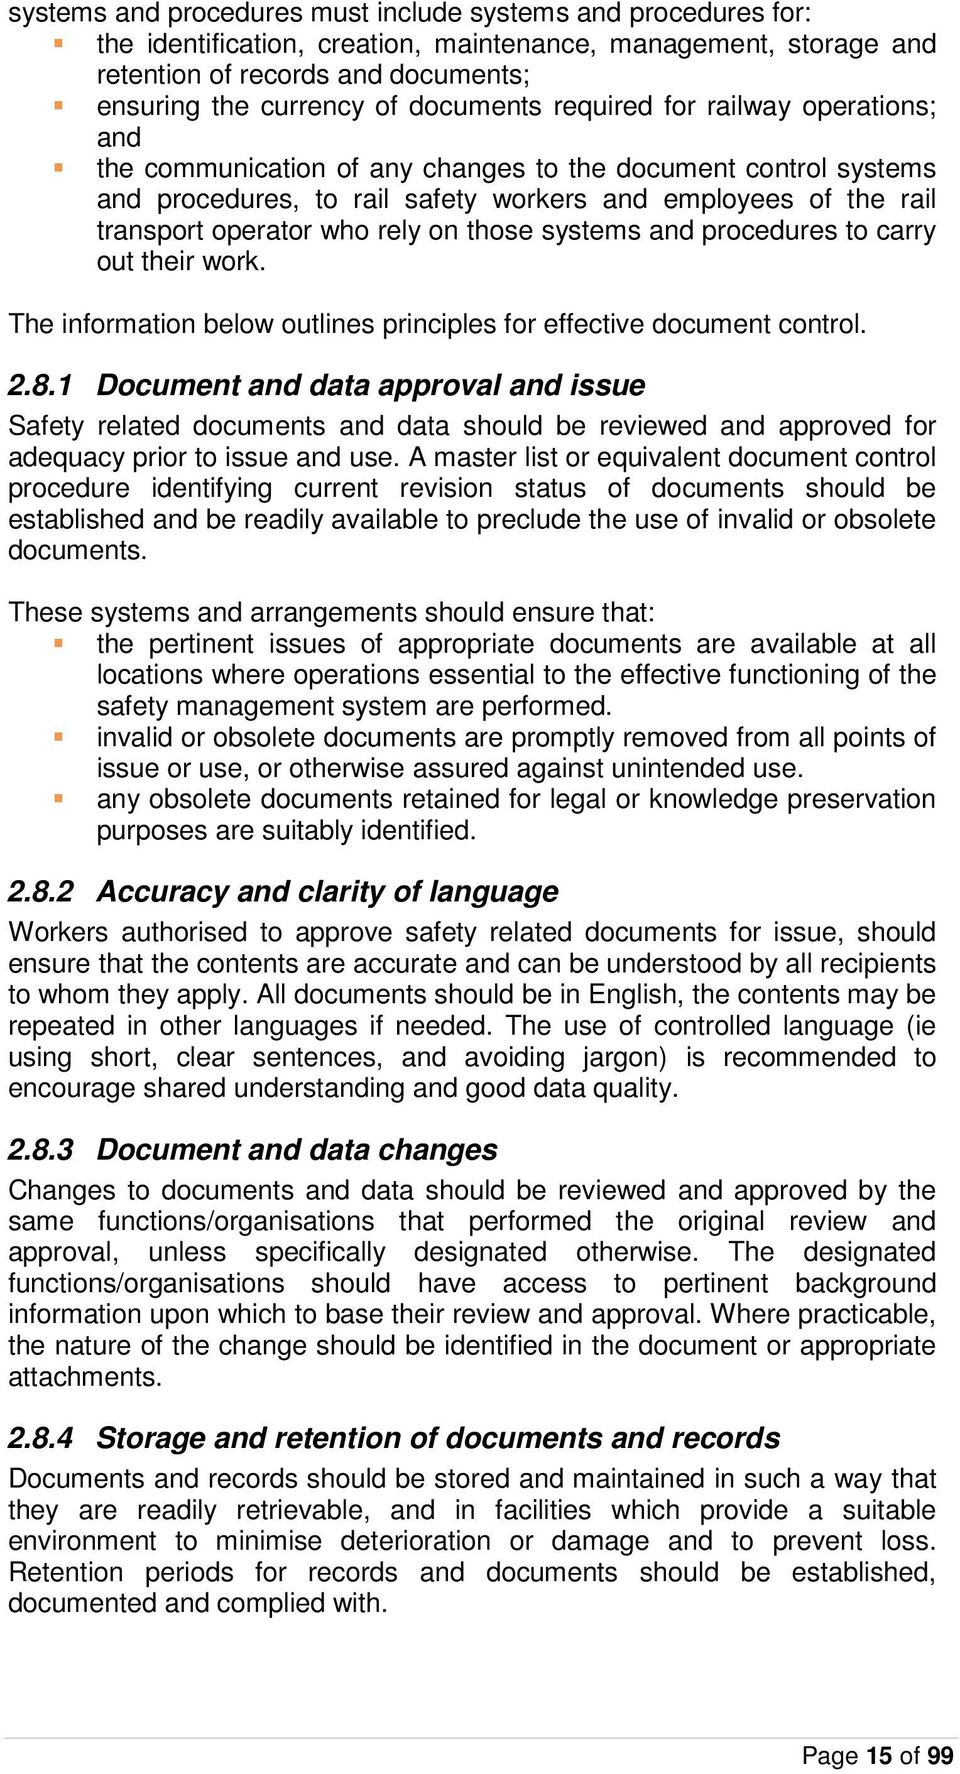 rely on those systems and procedures to carry out their work. The information below outlines principles for effective document control. 2.8.